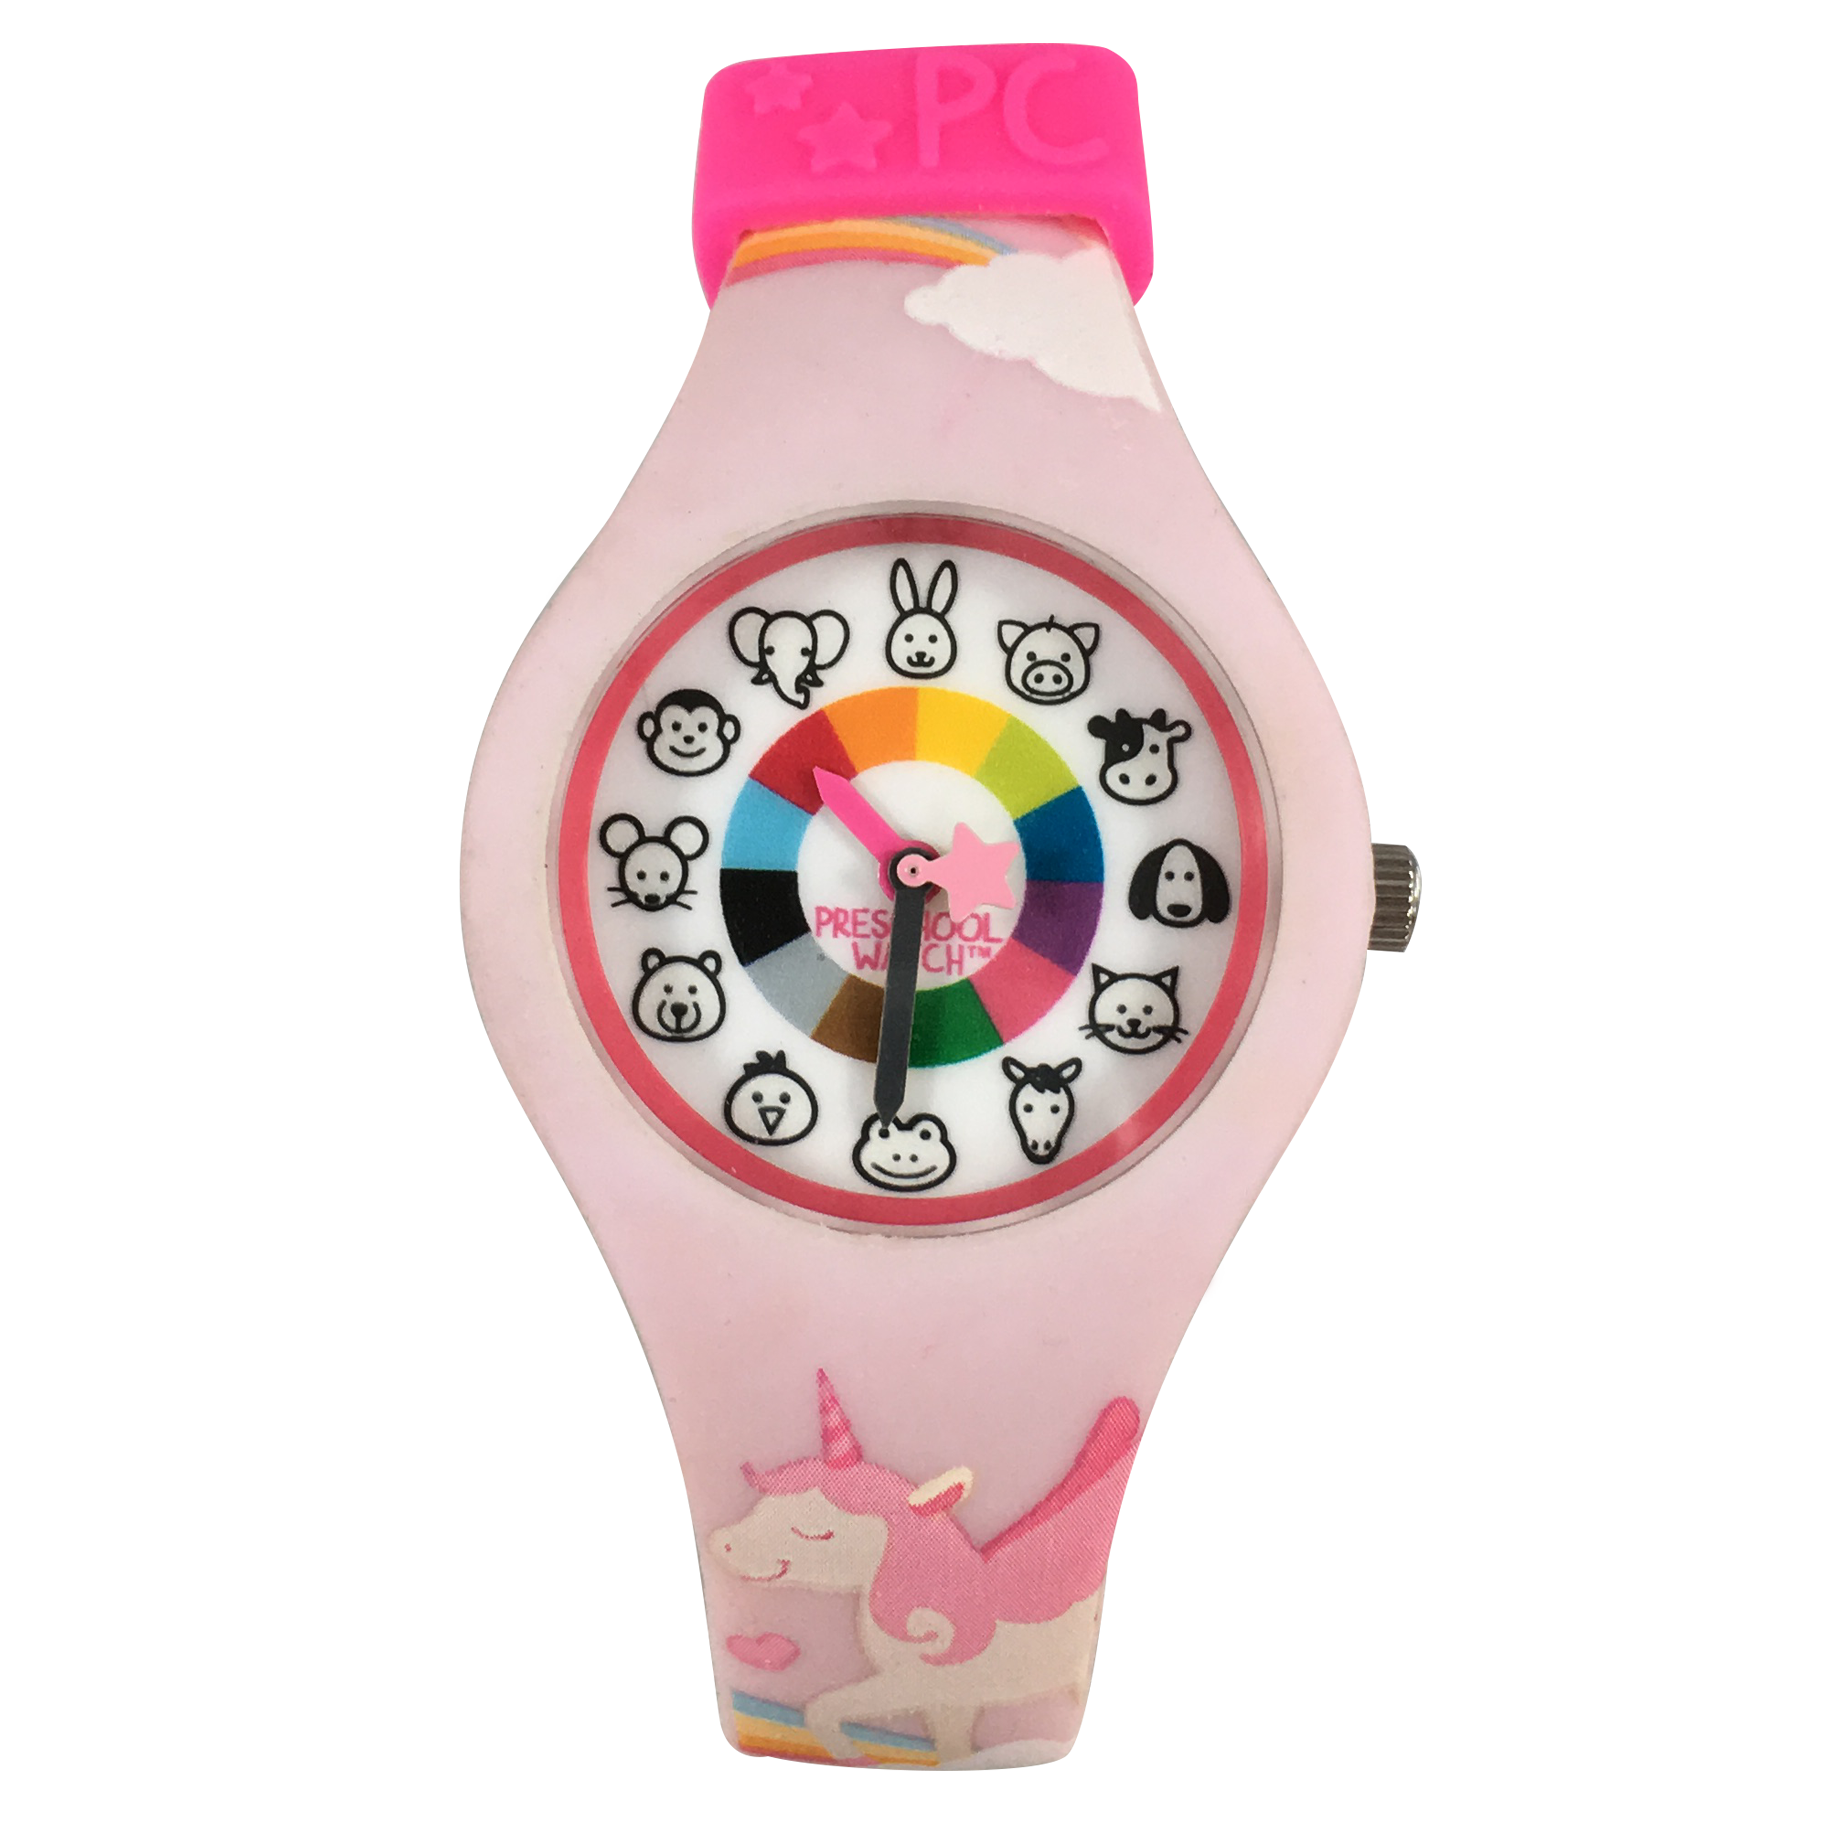 Toddler Watch Fun 3D Designs - Life Changing Products